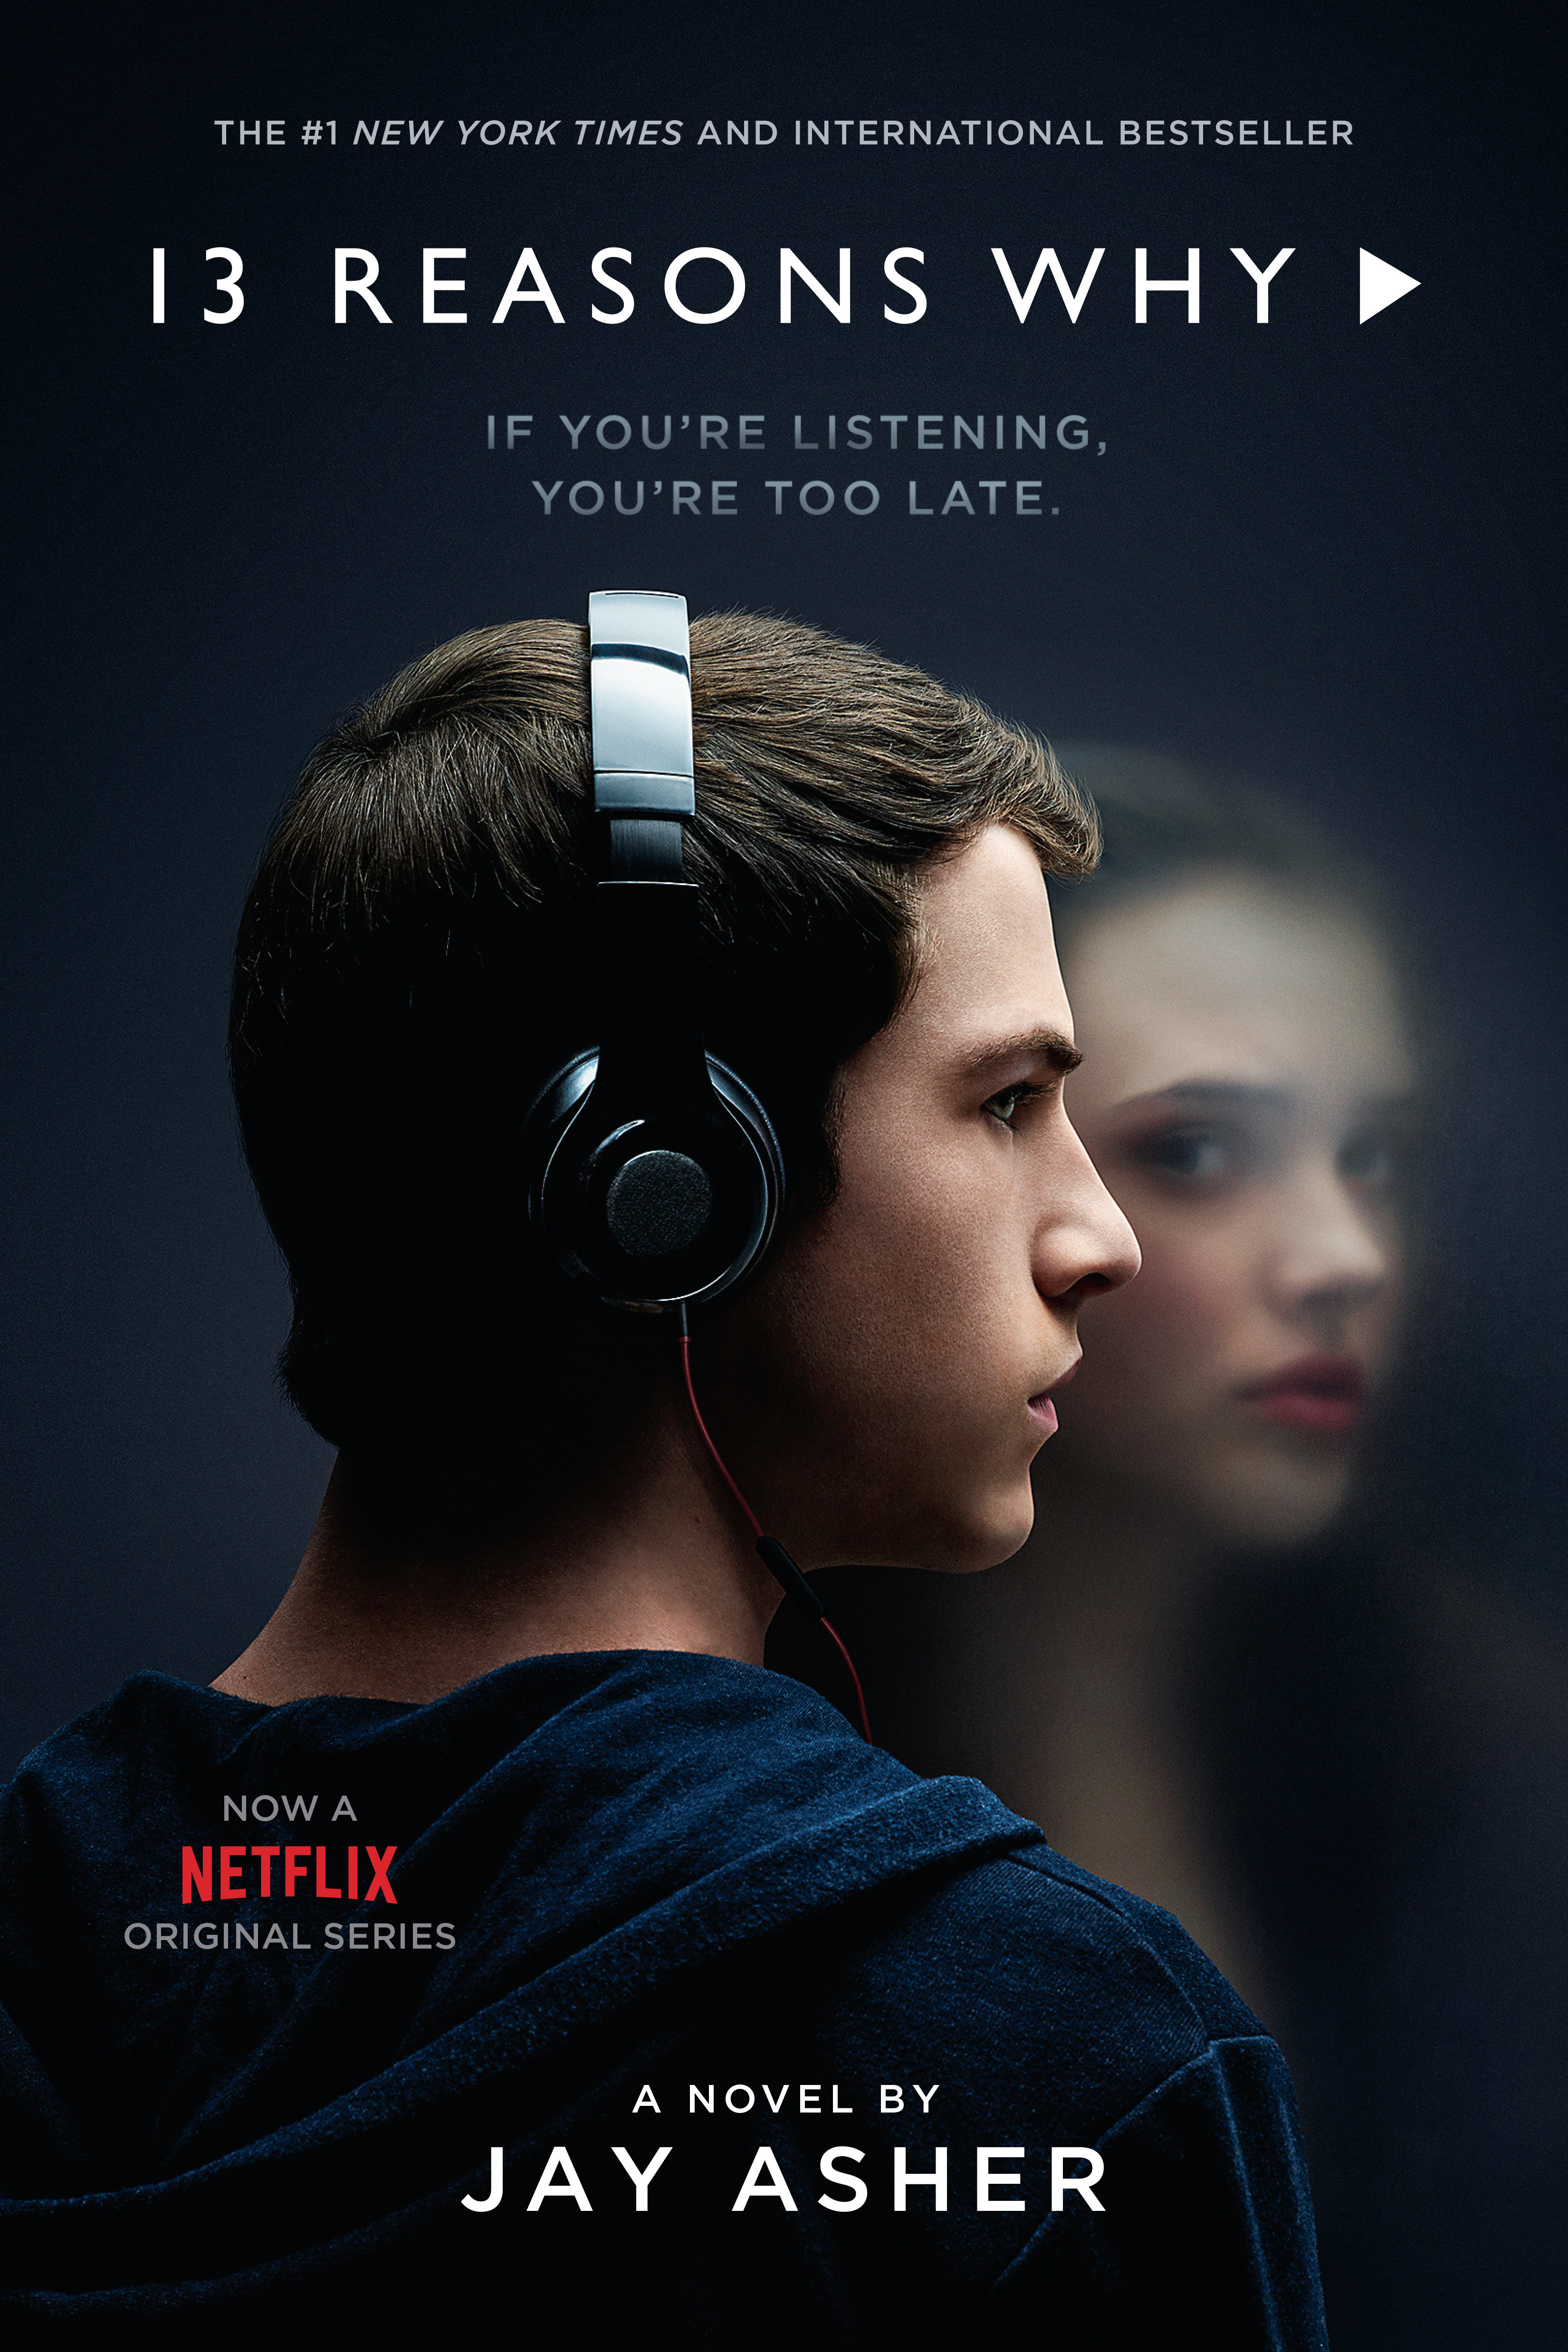 Cover Image of Thirteen Reasons Why